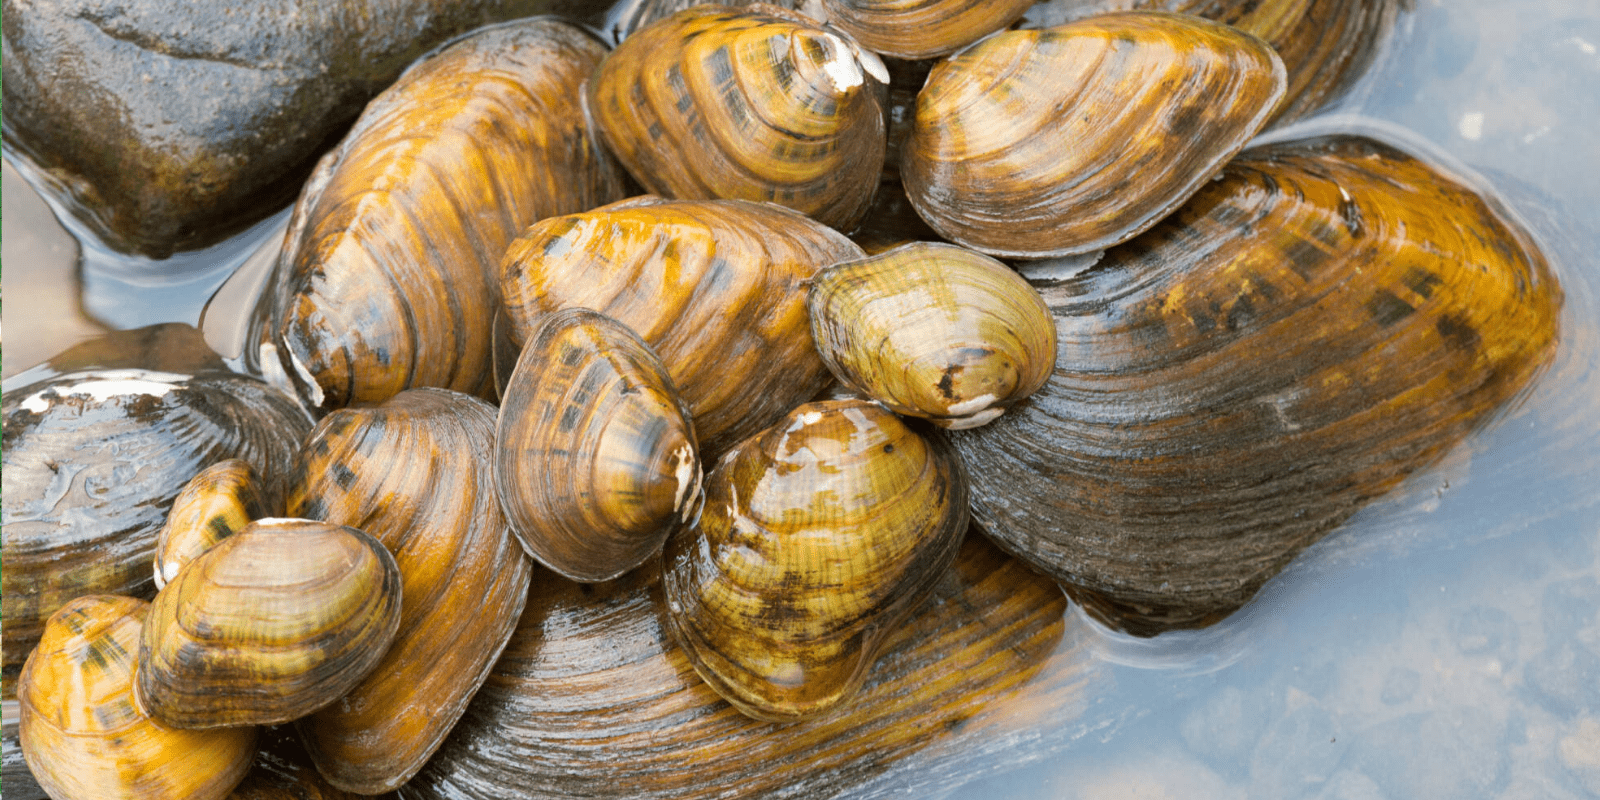 Freshwater mussels, Ryan Hagerty/USFWS